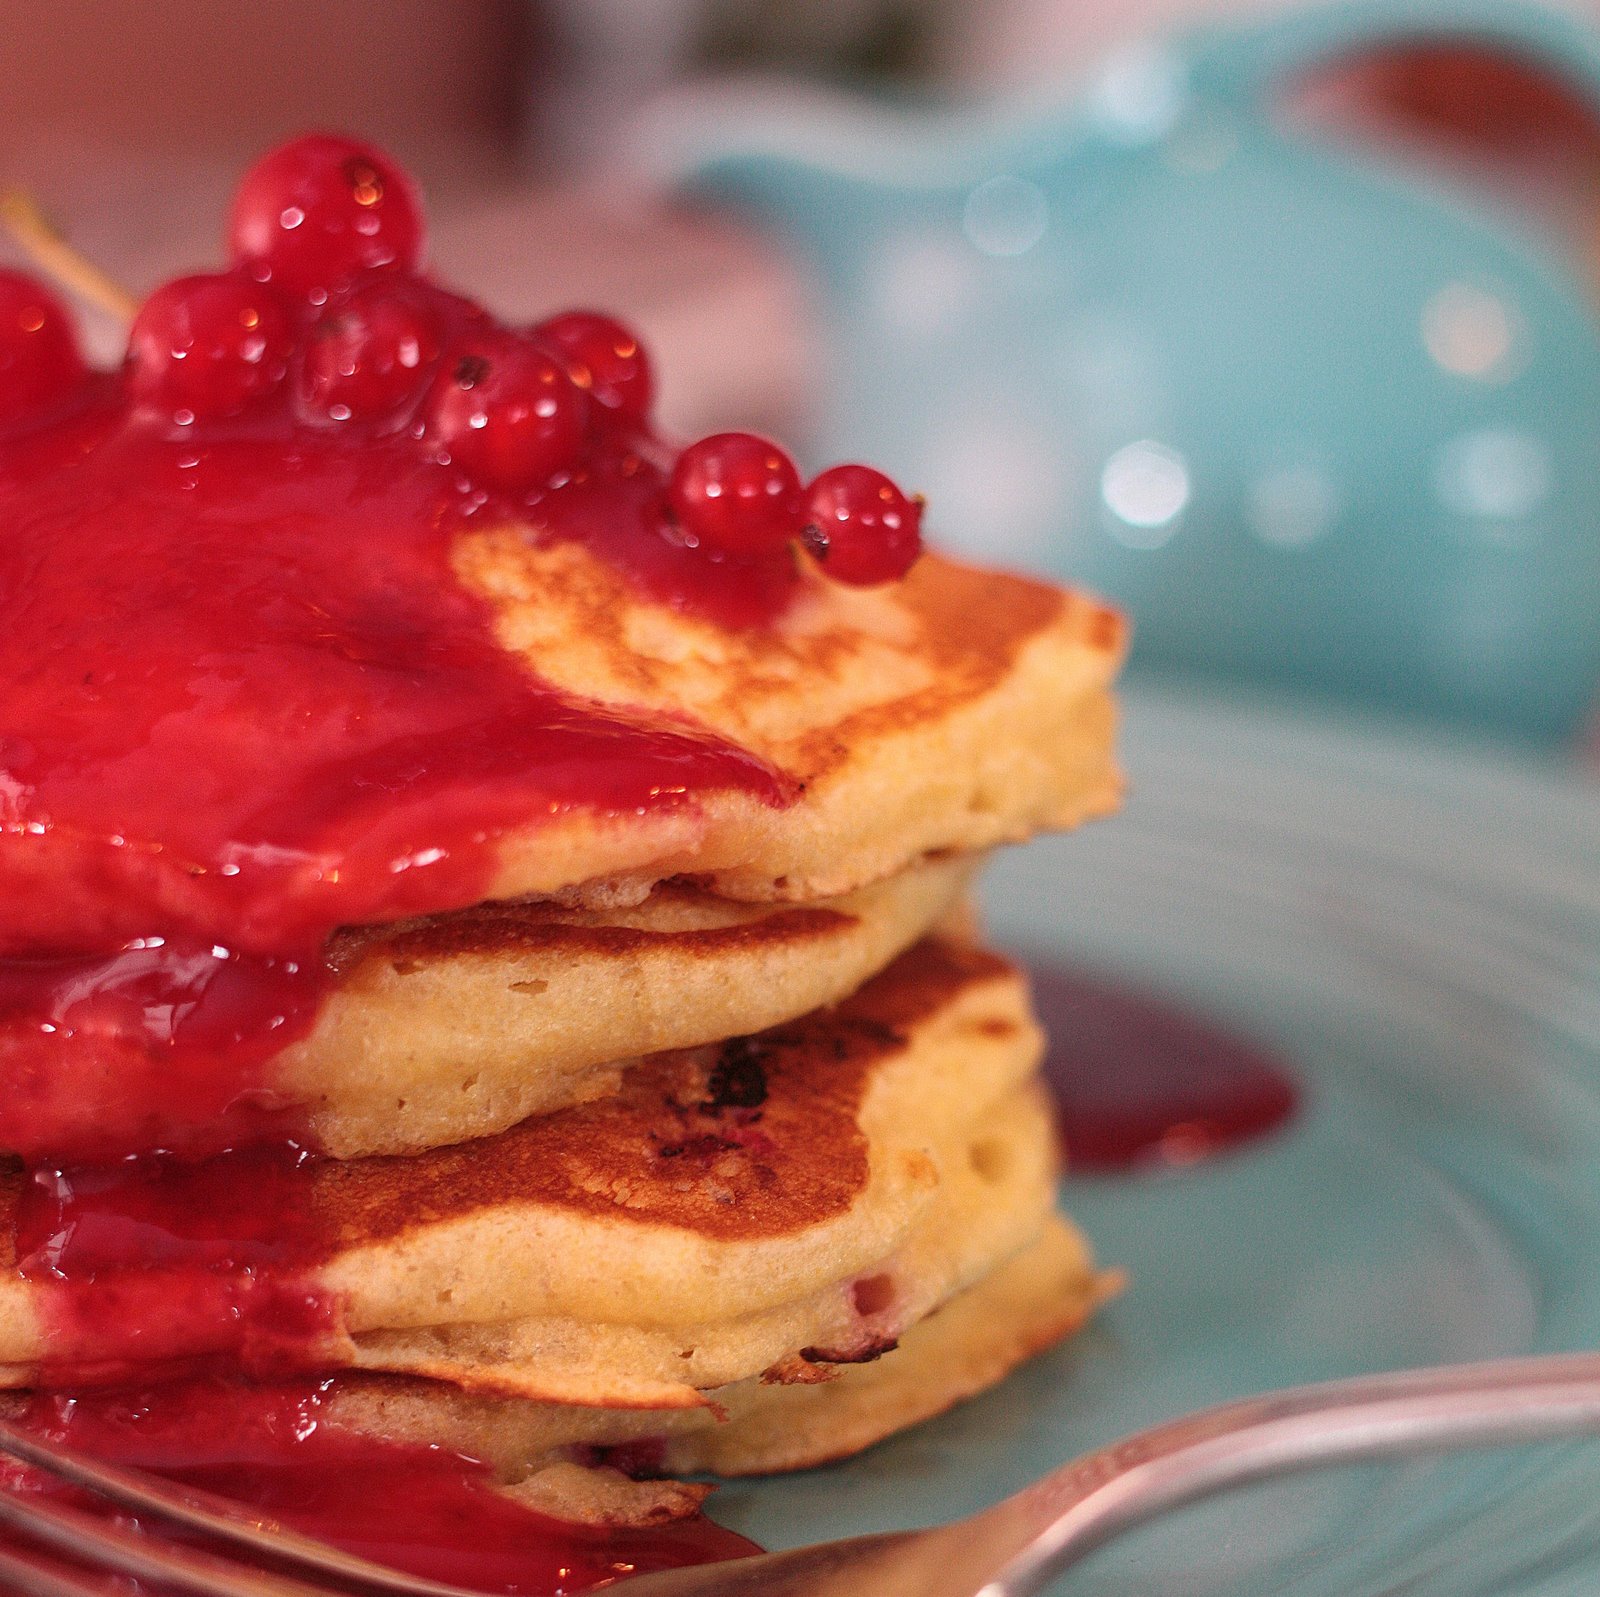 Cornmeal Red Currant Pancakes with Red Currant Syrup